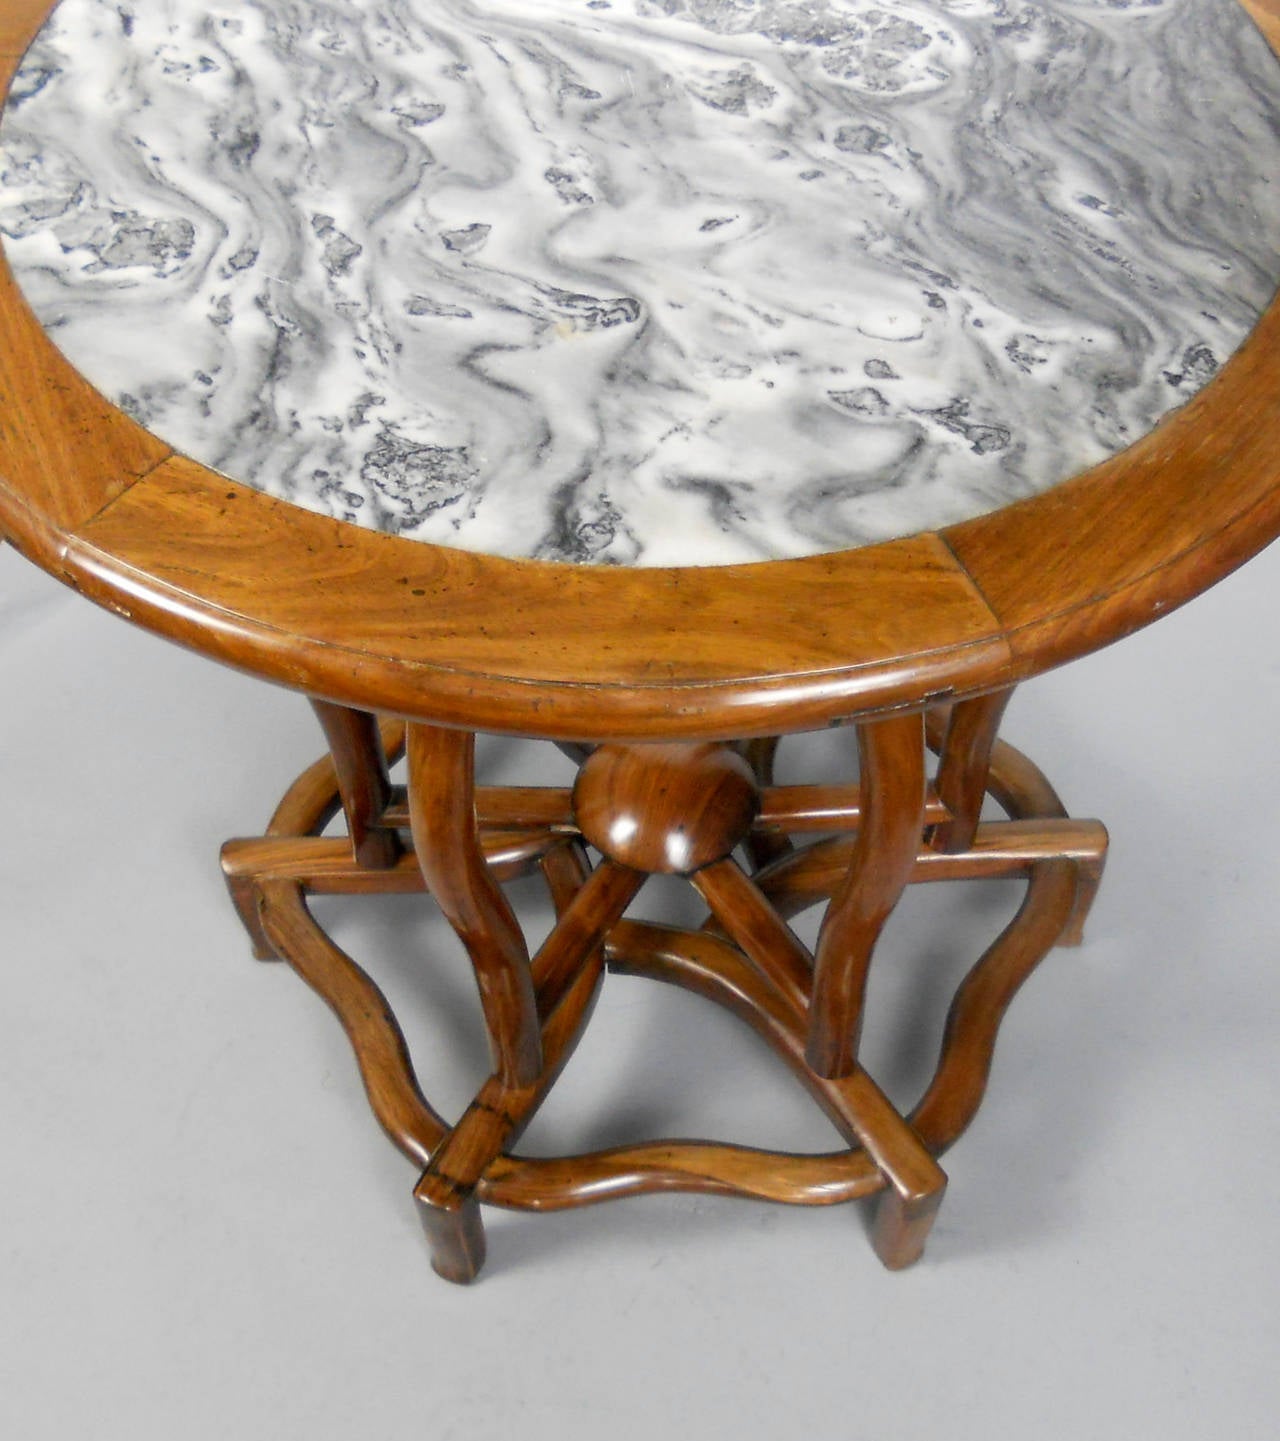 This Qing dynasty circular table has a beautiful grey, black, and white marble top set within a hardwood frame. The six curvilinear legs are connected by a sunburst stretcher raised on an open hexafoil base.